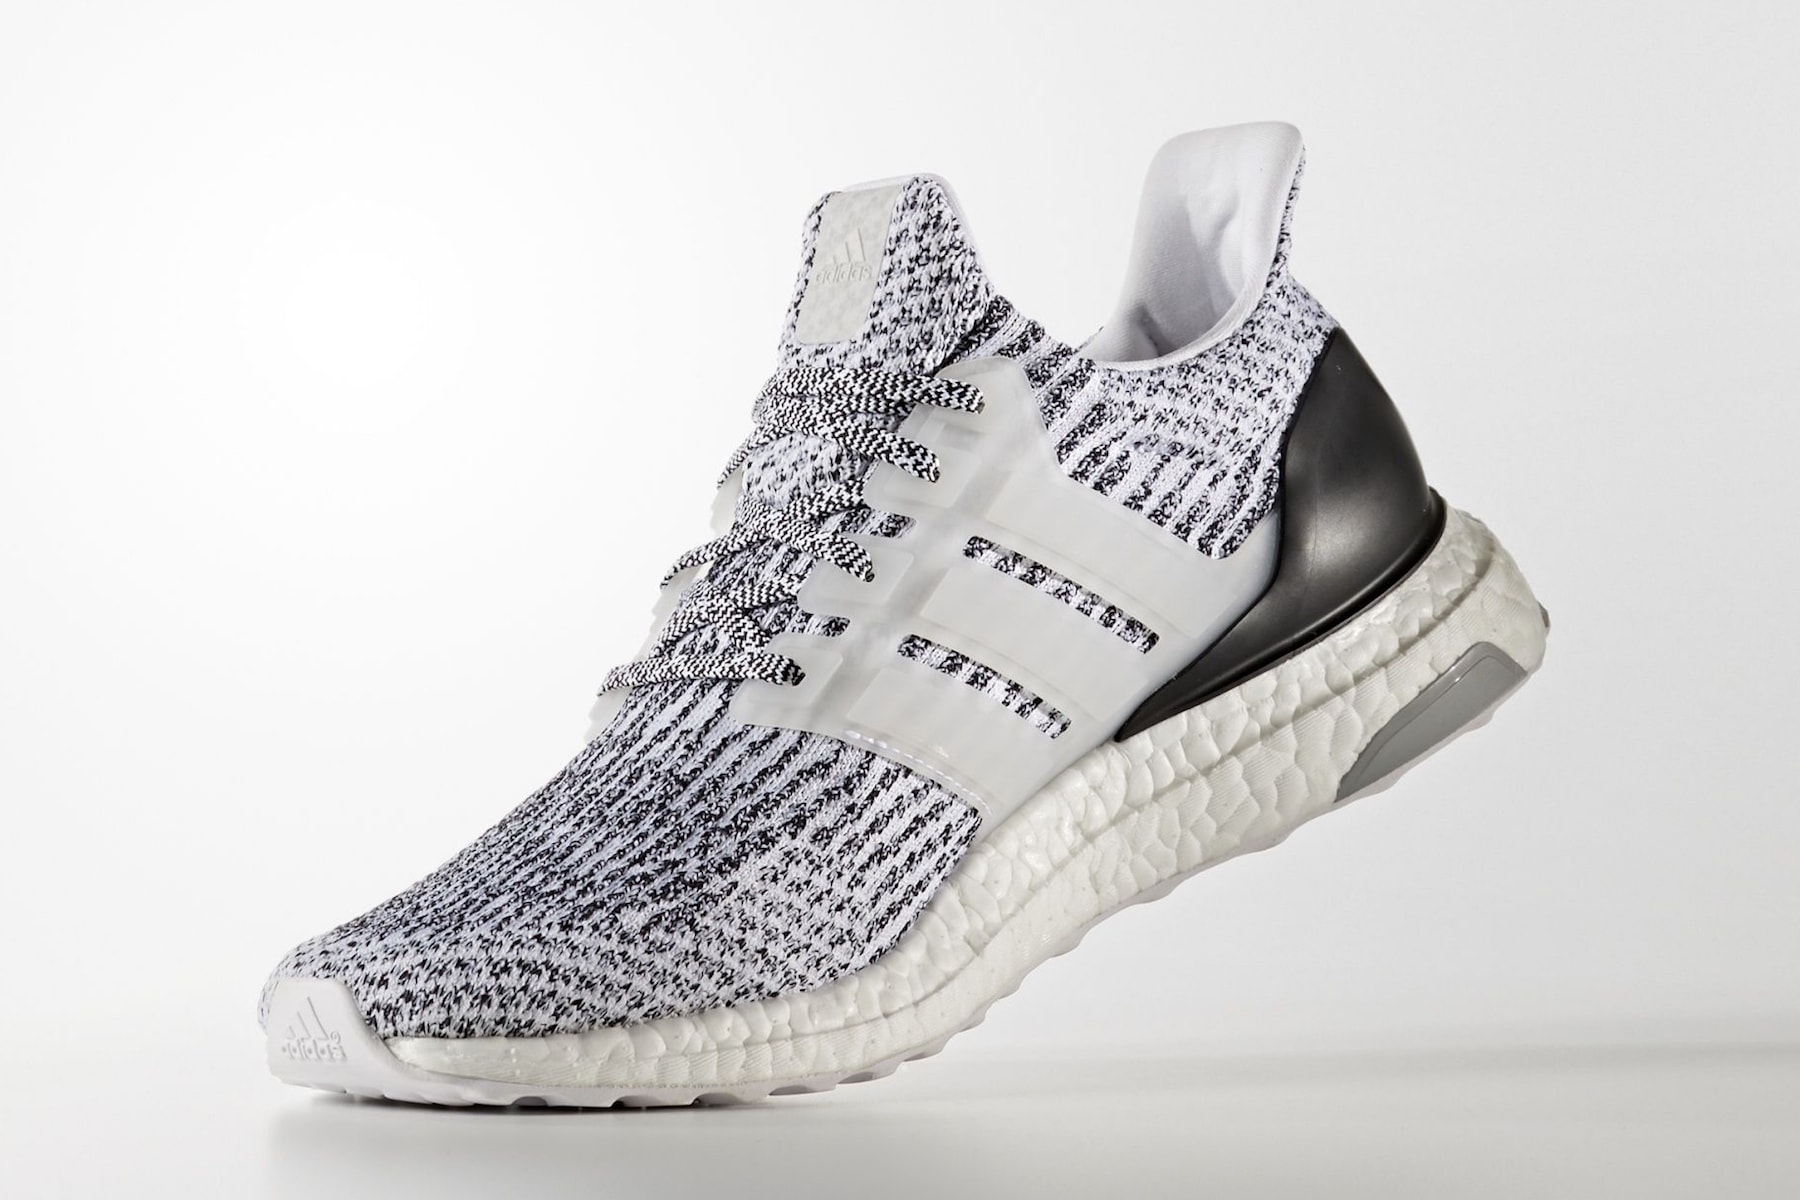 adidas UltraBOOST 3.0 “Oreo” Official Images